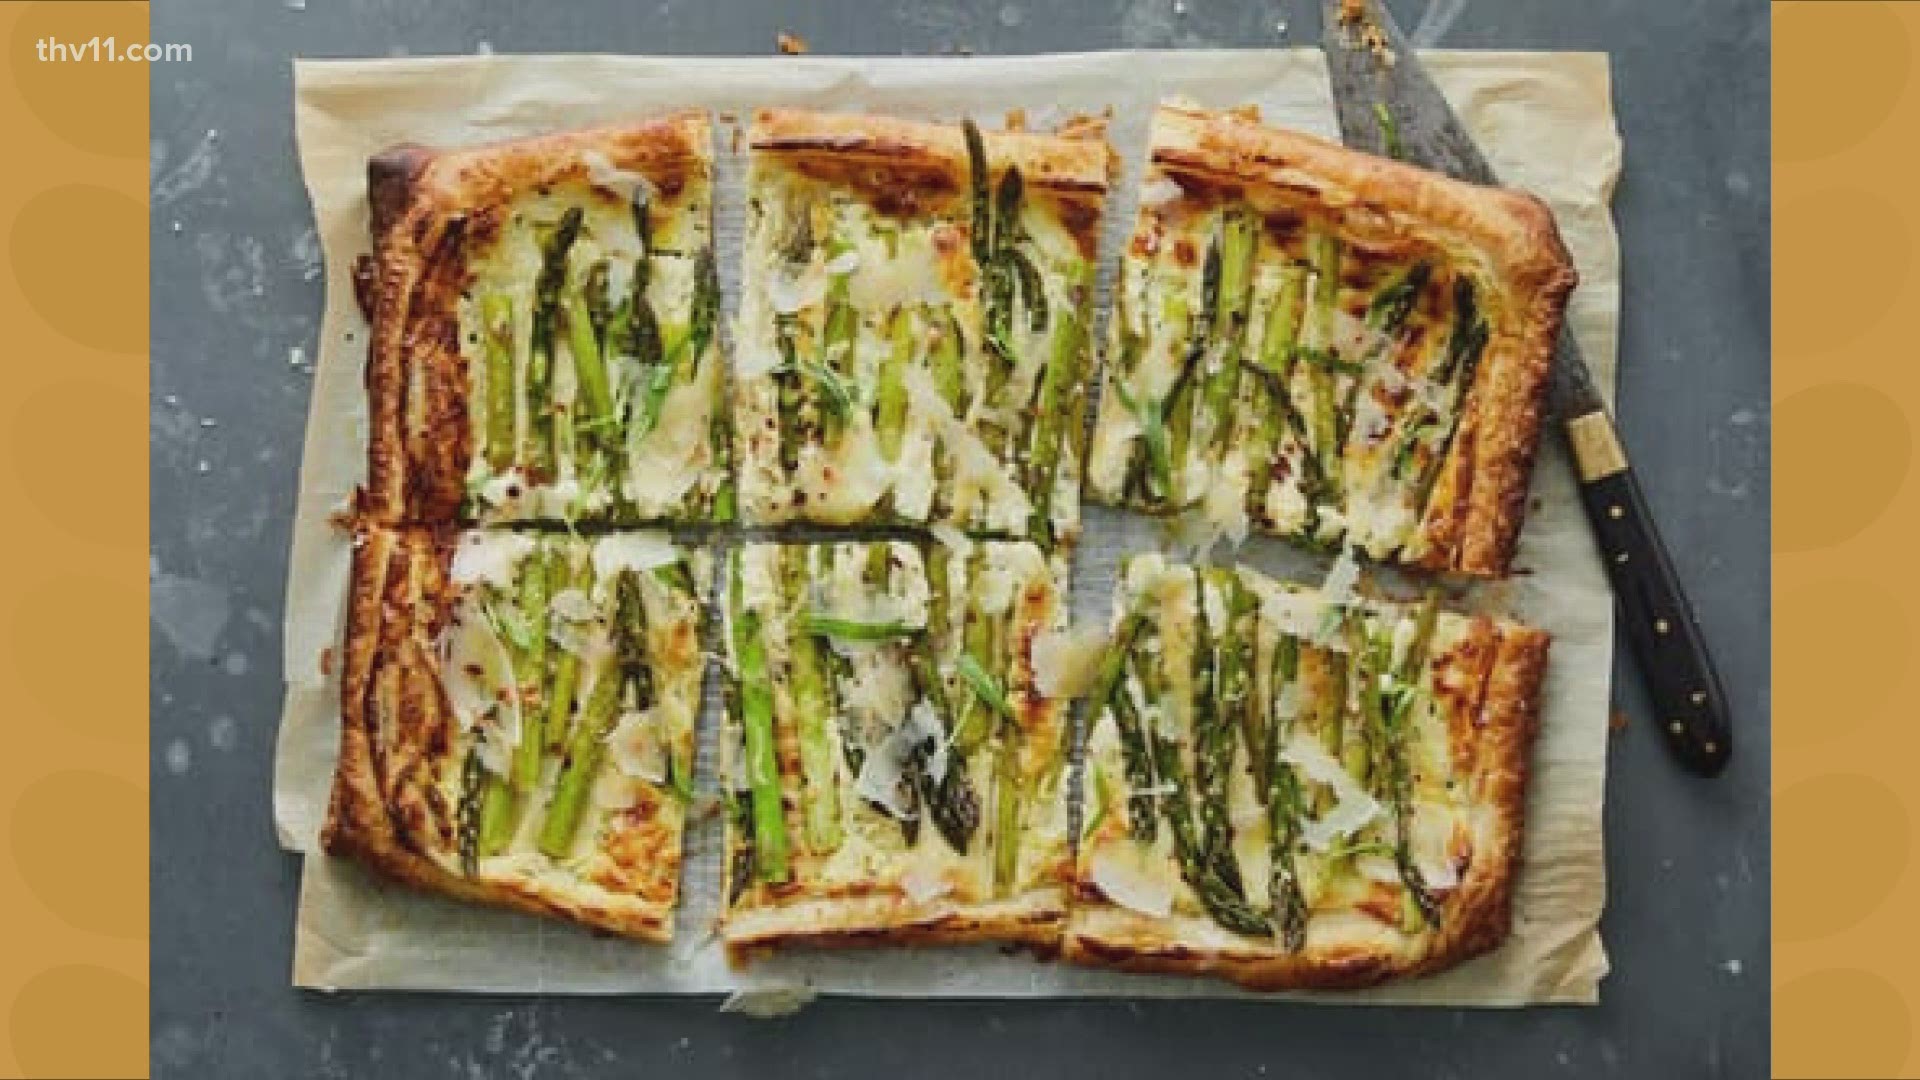 Debbie Arnold with blog Dining with Debbie shares a recipe for asparagus-goat cheese tarts, a great addition to your Easter brunch.